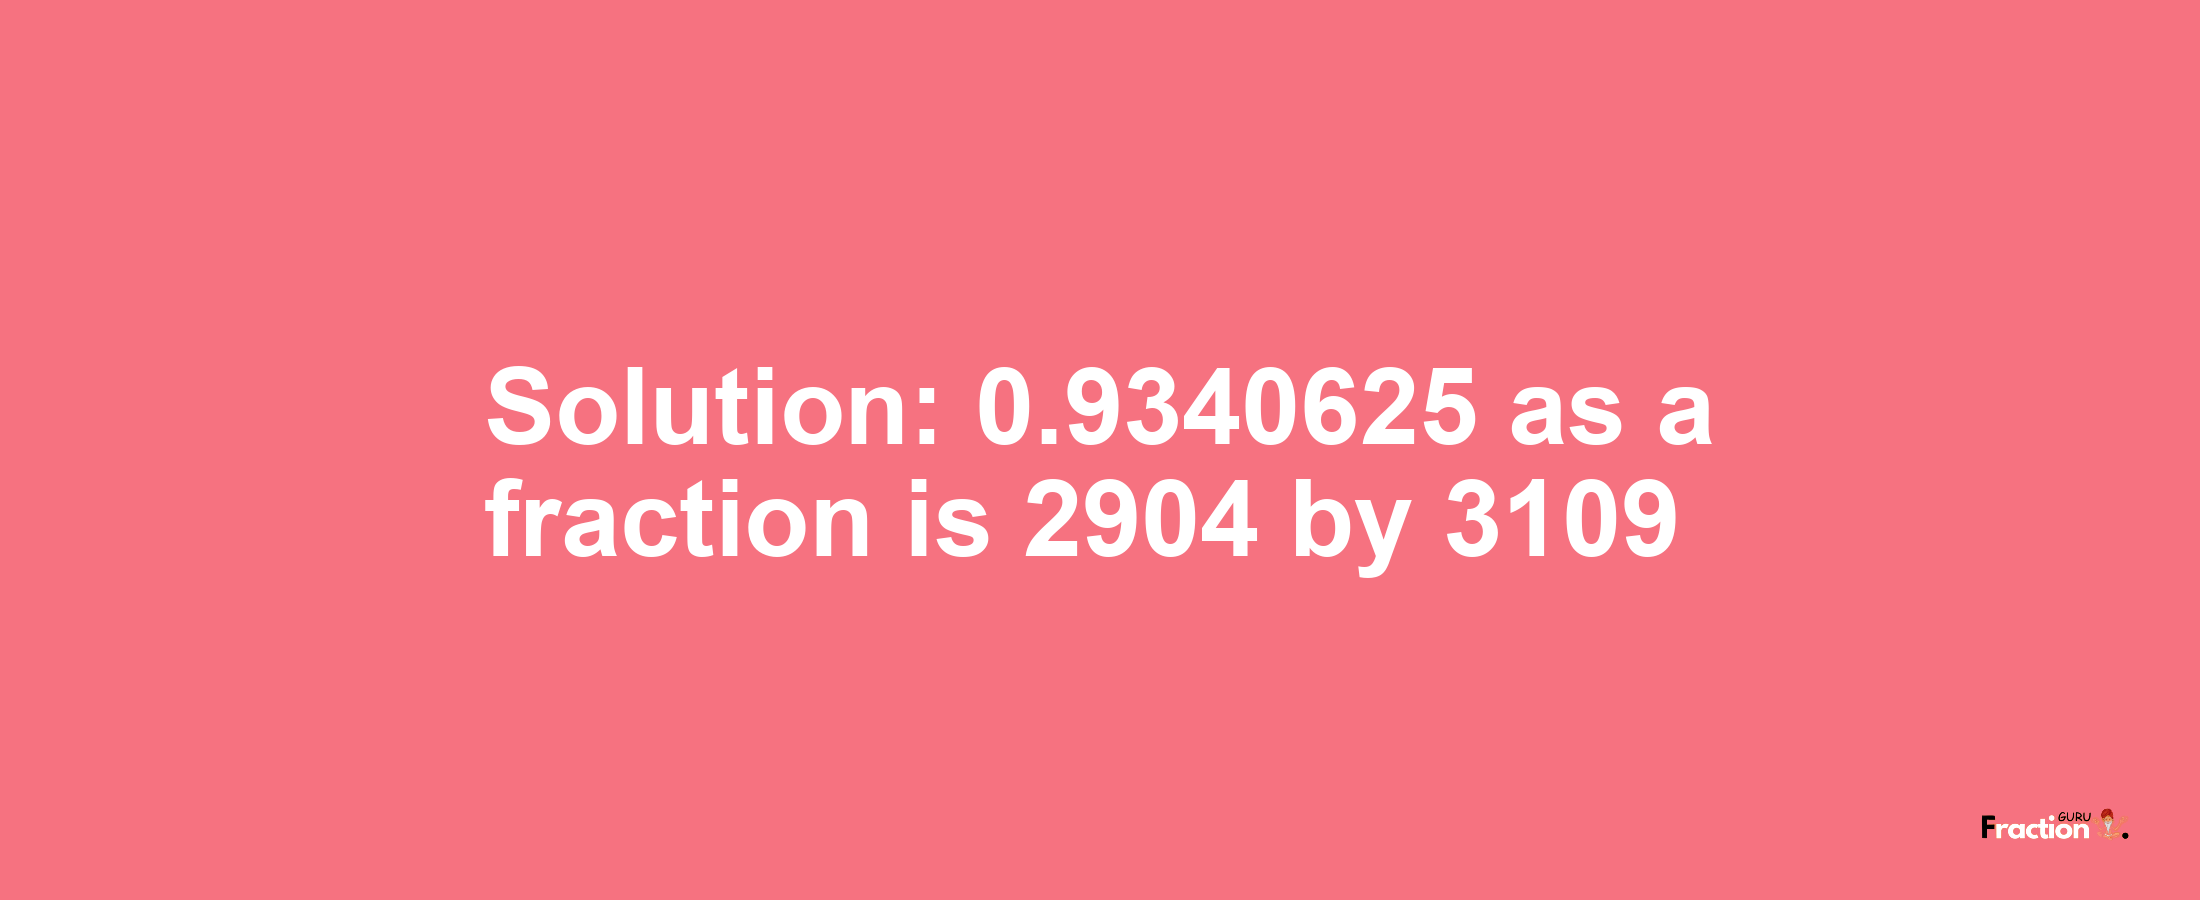 Solution:0.9340625 as a fraction is 2904/3109